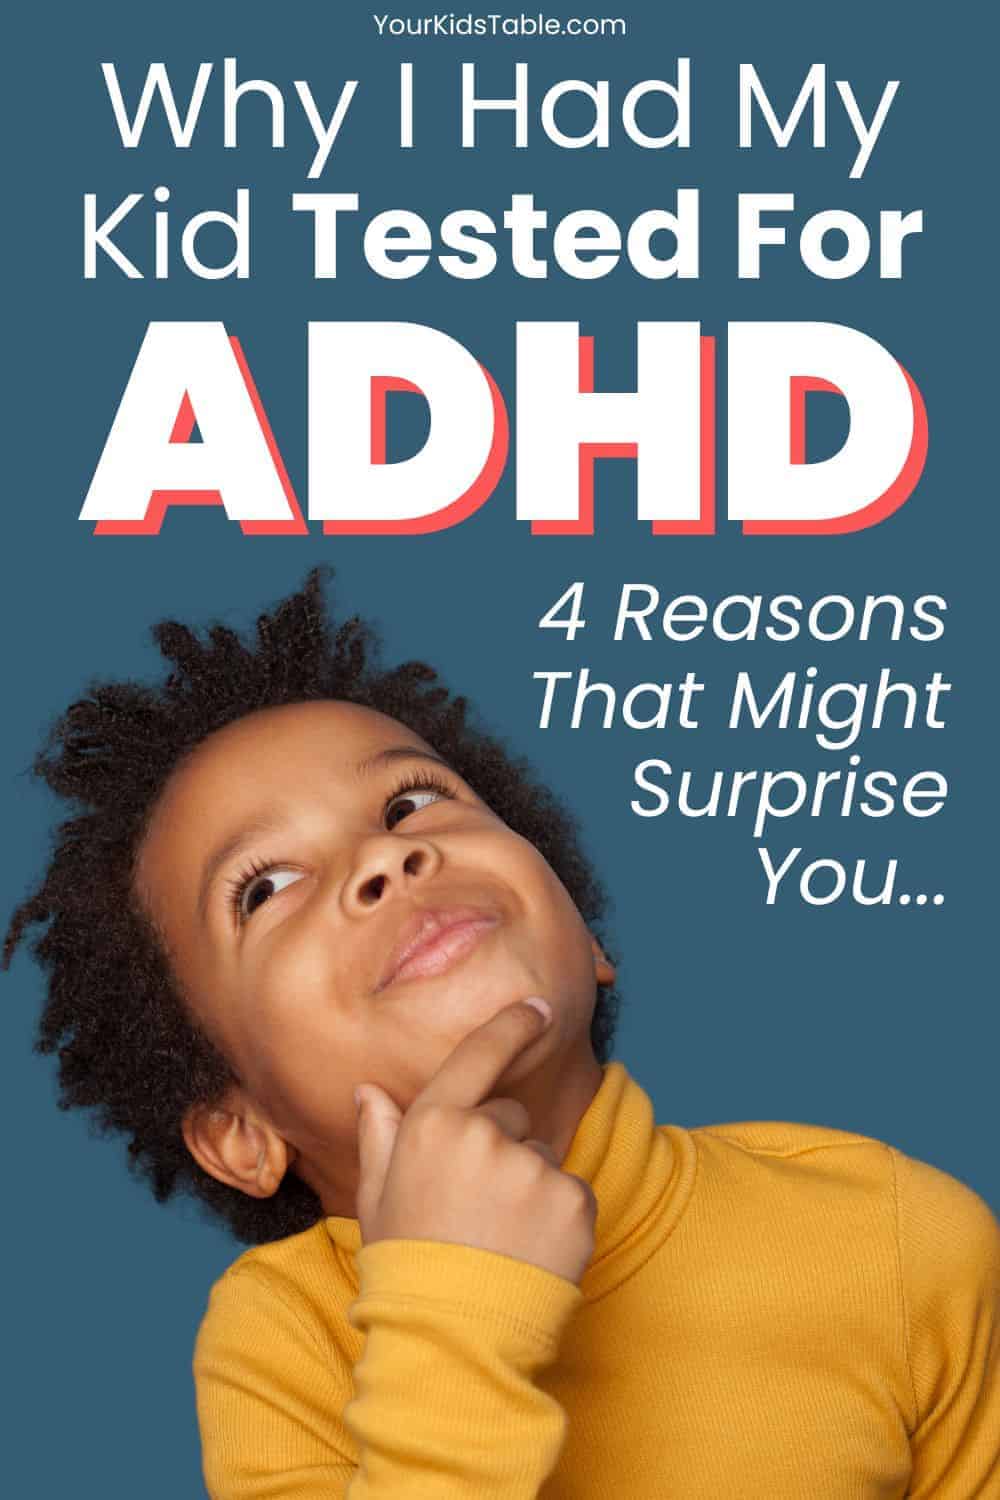 Learn 4 reasons I evaluated my son for ADHD, as well as the benefits of getting a diagnosis. Personal perspective from an OT and mom.